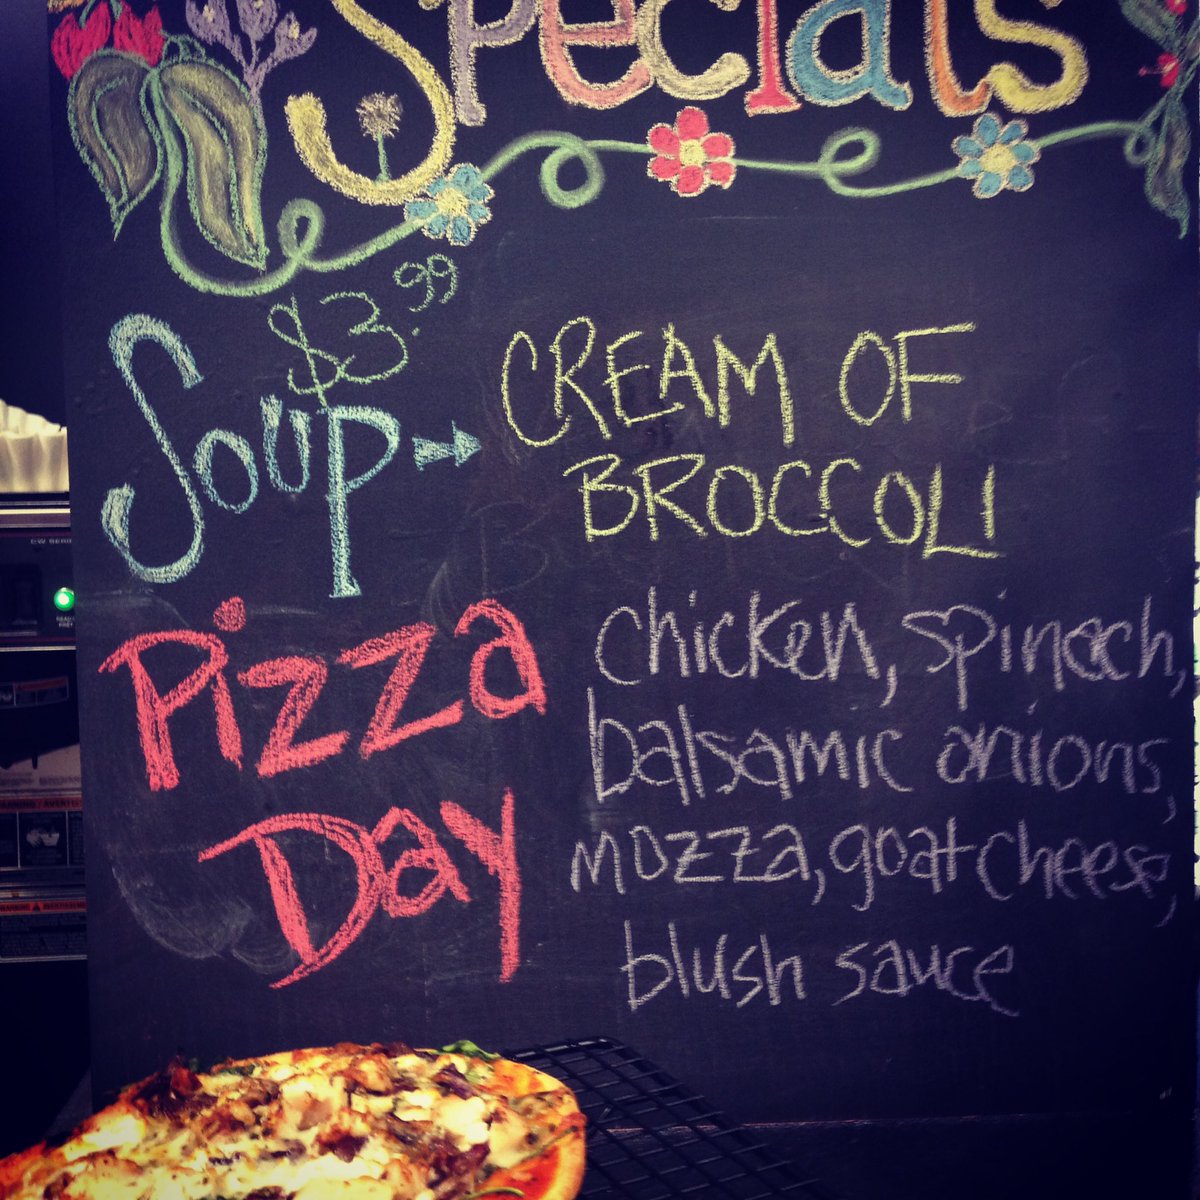 #creamofbroccoli #chicken #spinach #balsamiconions #mozza #goatcheese #blushsauce #ldnont #lunch #soho #pizzaday